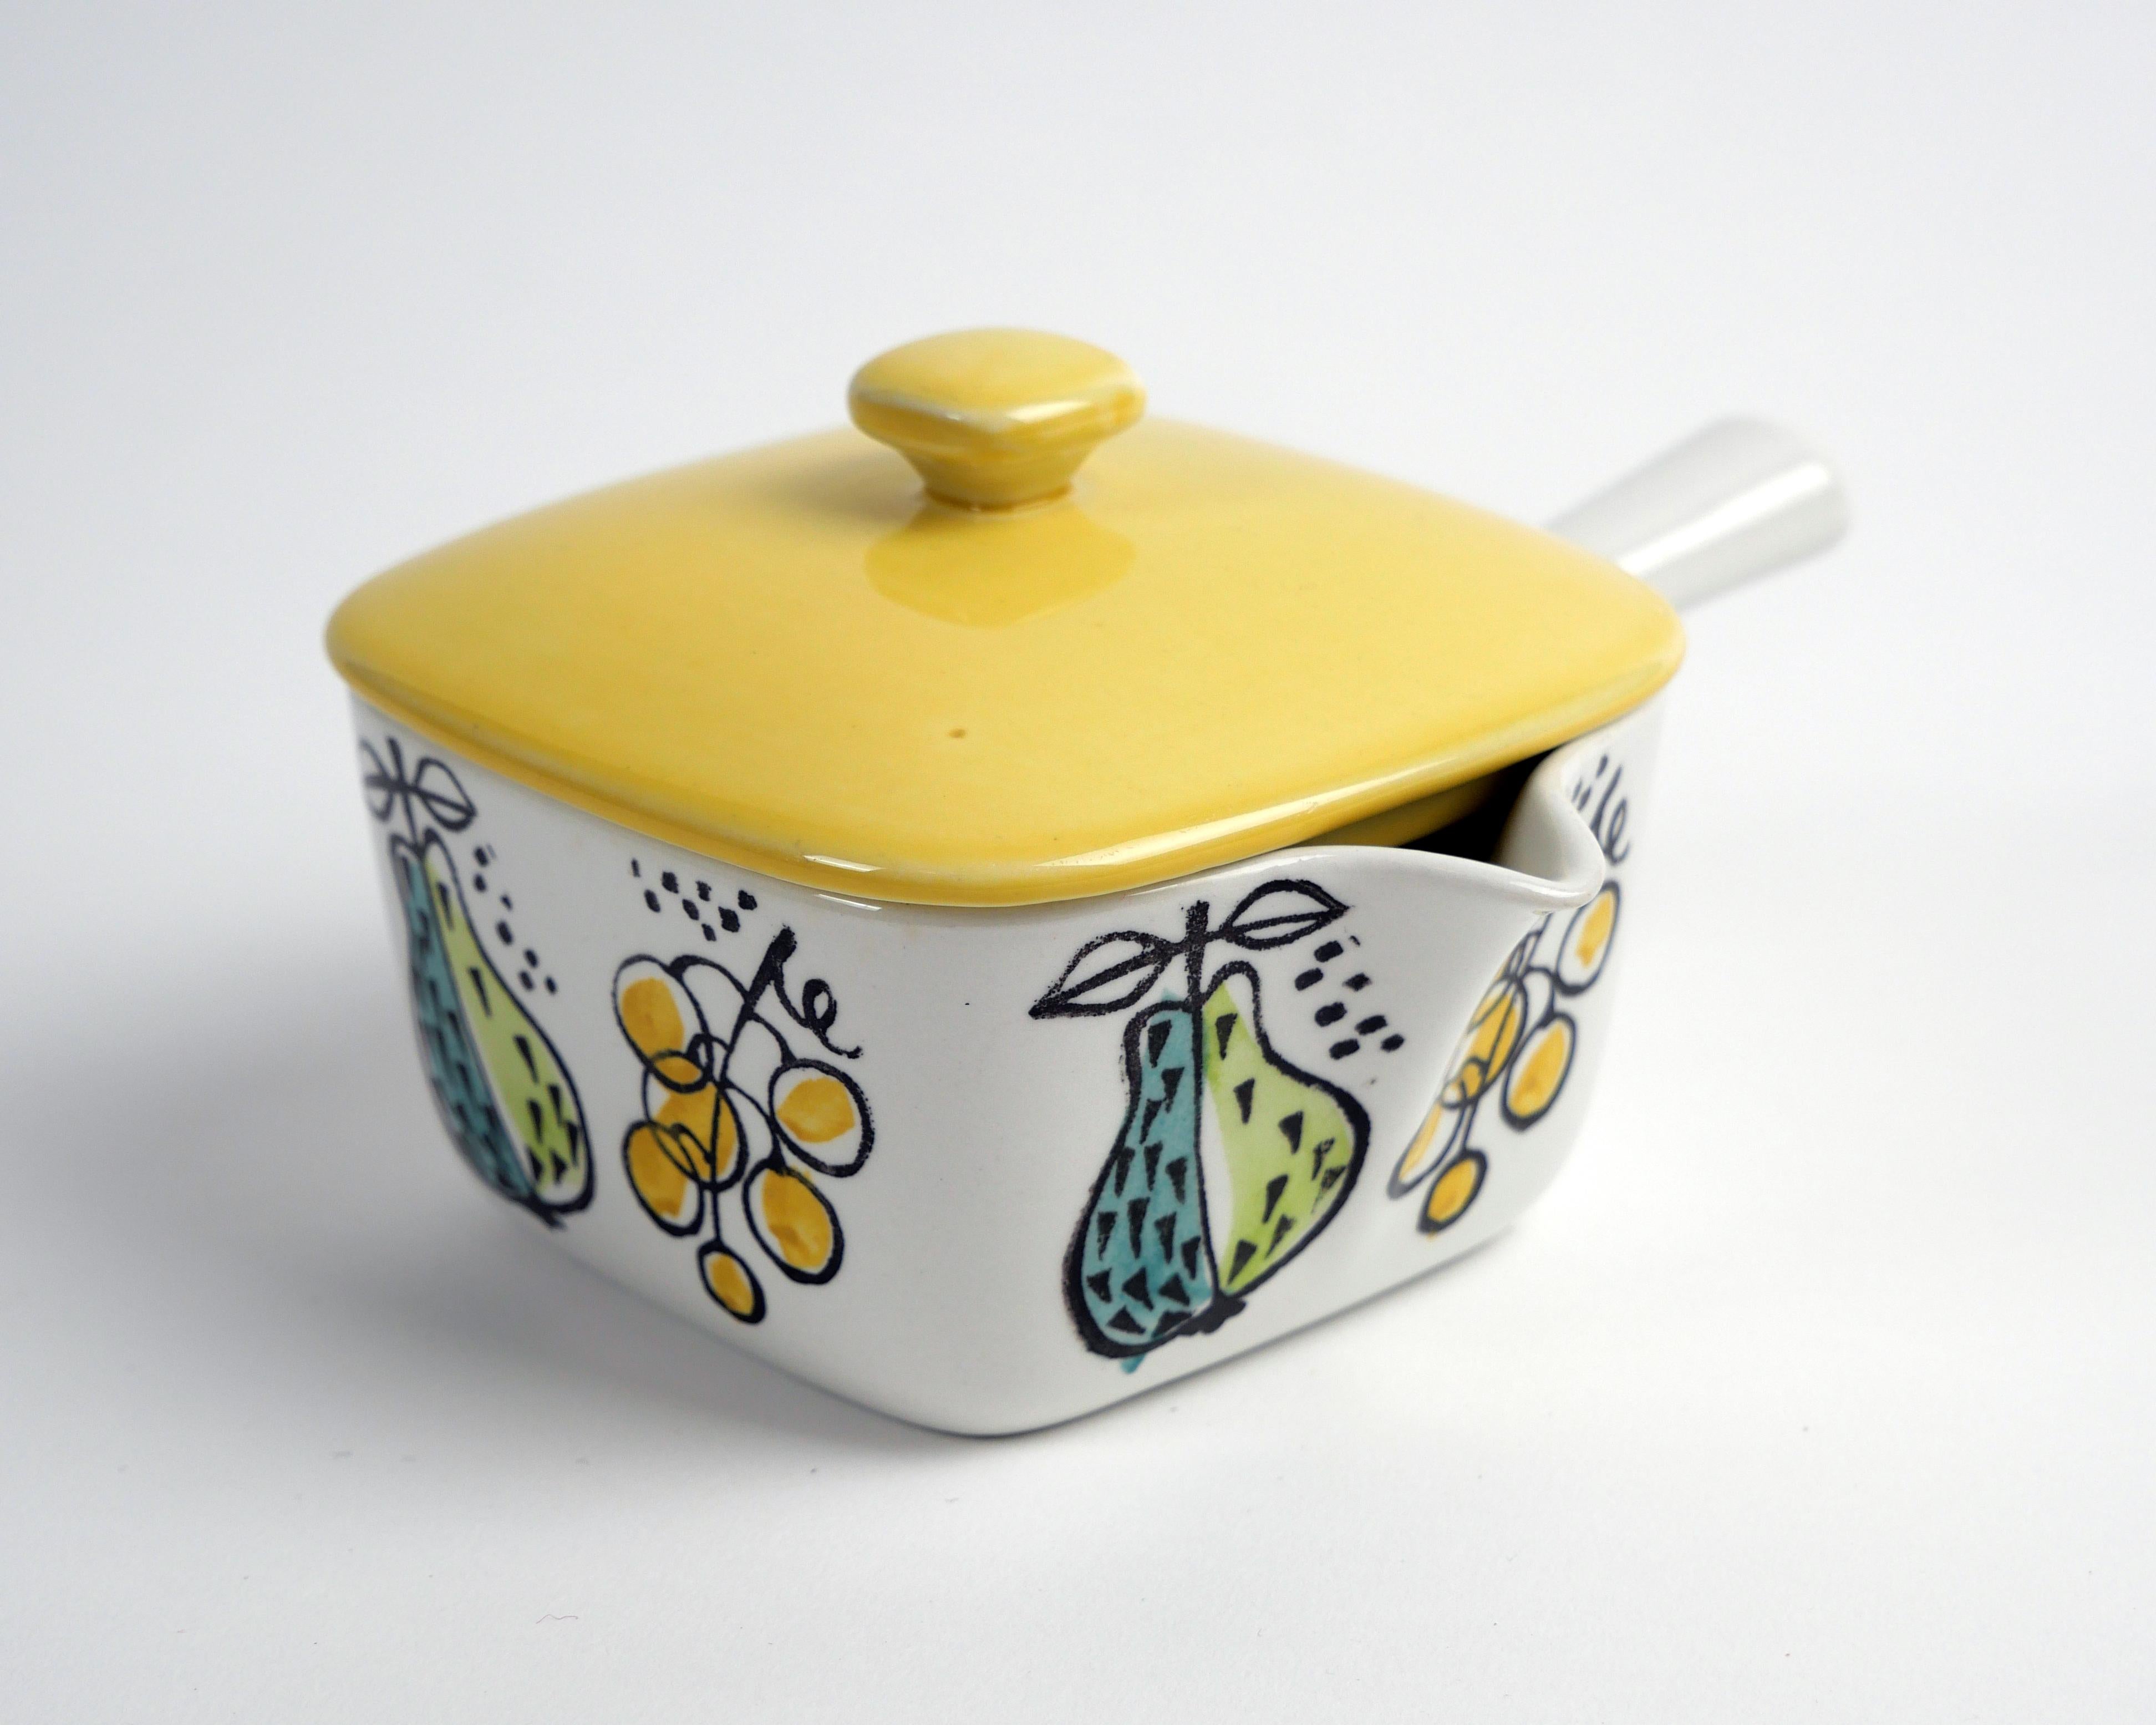 Marianne Westman for Rörstrand (Sweden)
‘Granada’ ovenware pot with lid, c. 1957

Pretty little oven-proof pot decorated in classic Westman 1950s style.
Manufacturer’s mark to underside.
Excellent condition with no scratches or